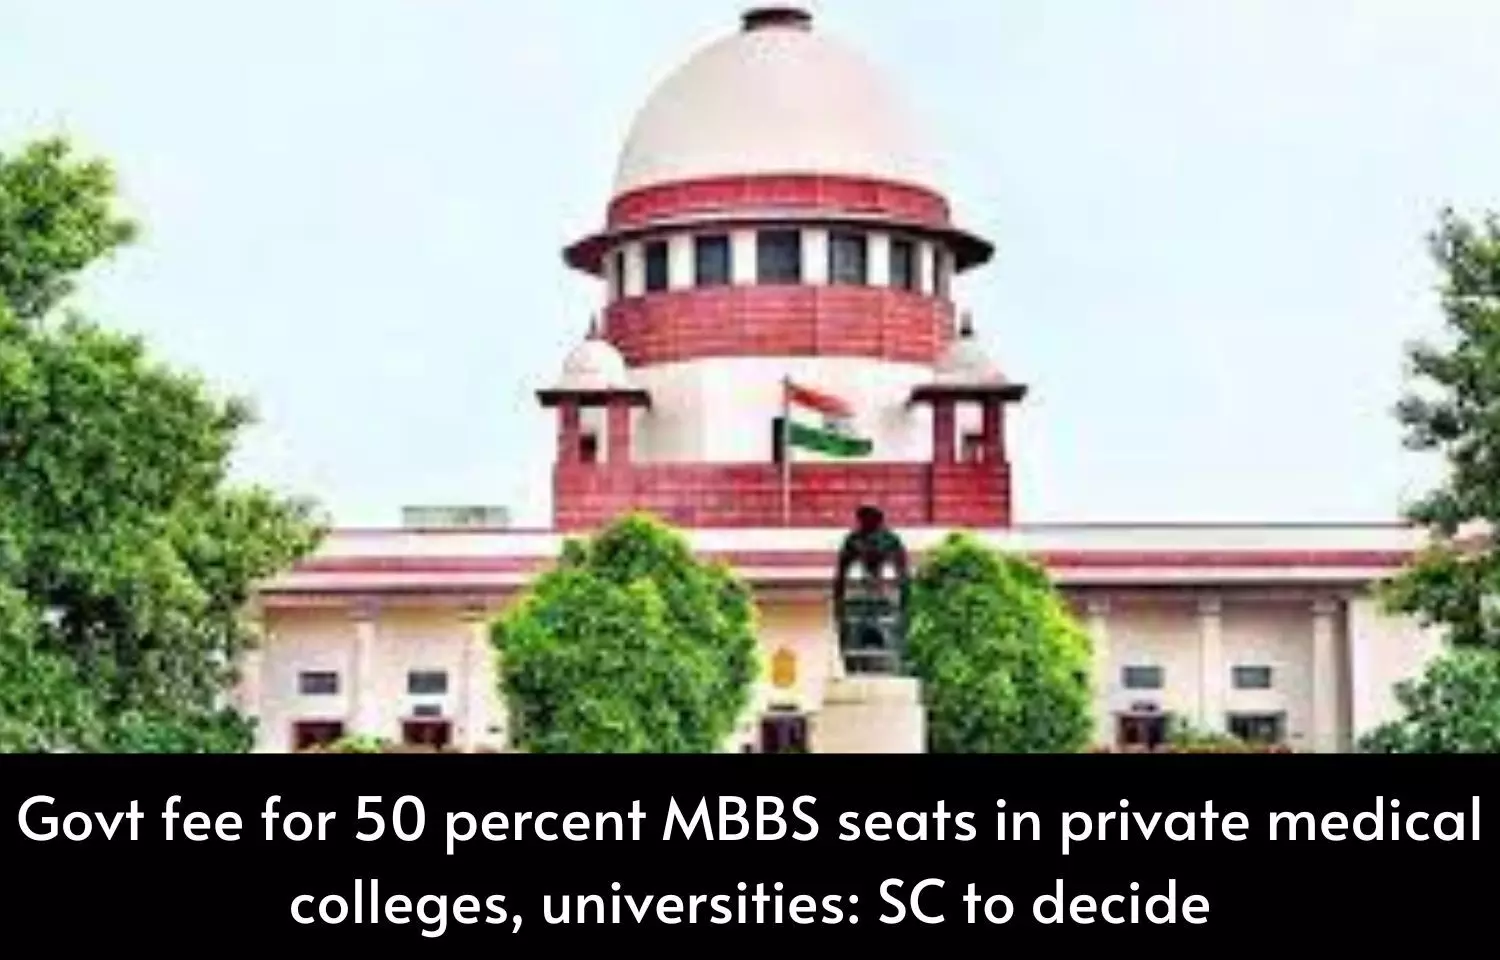 Govt fee for 50 percent MBBS seats in private medical colleges, universities: SC to decide